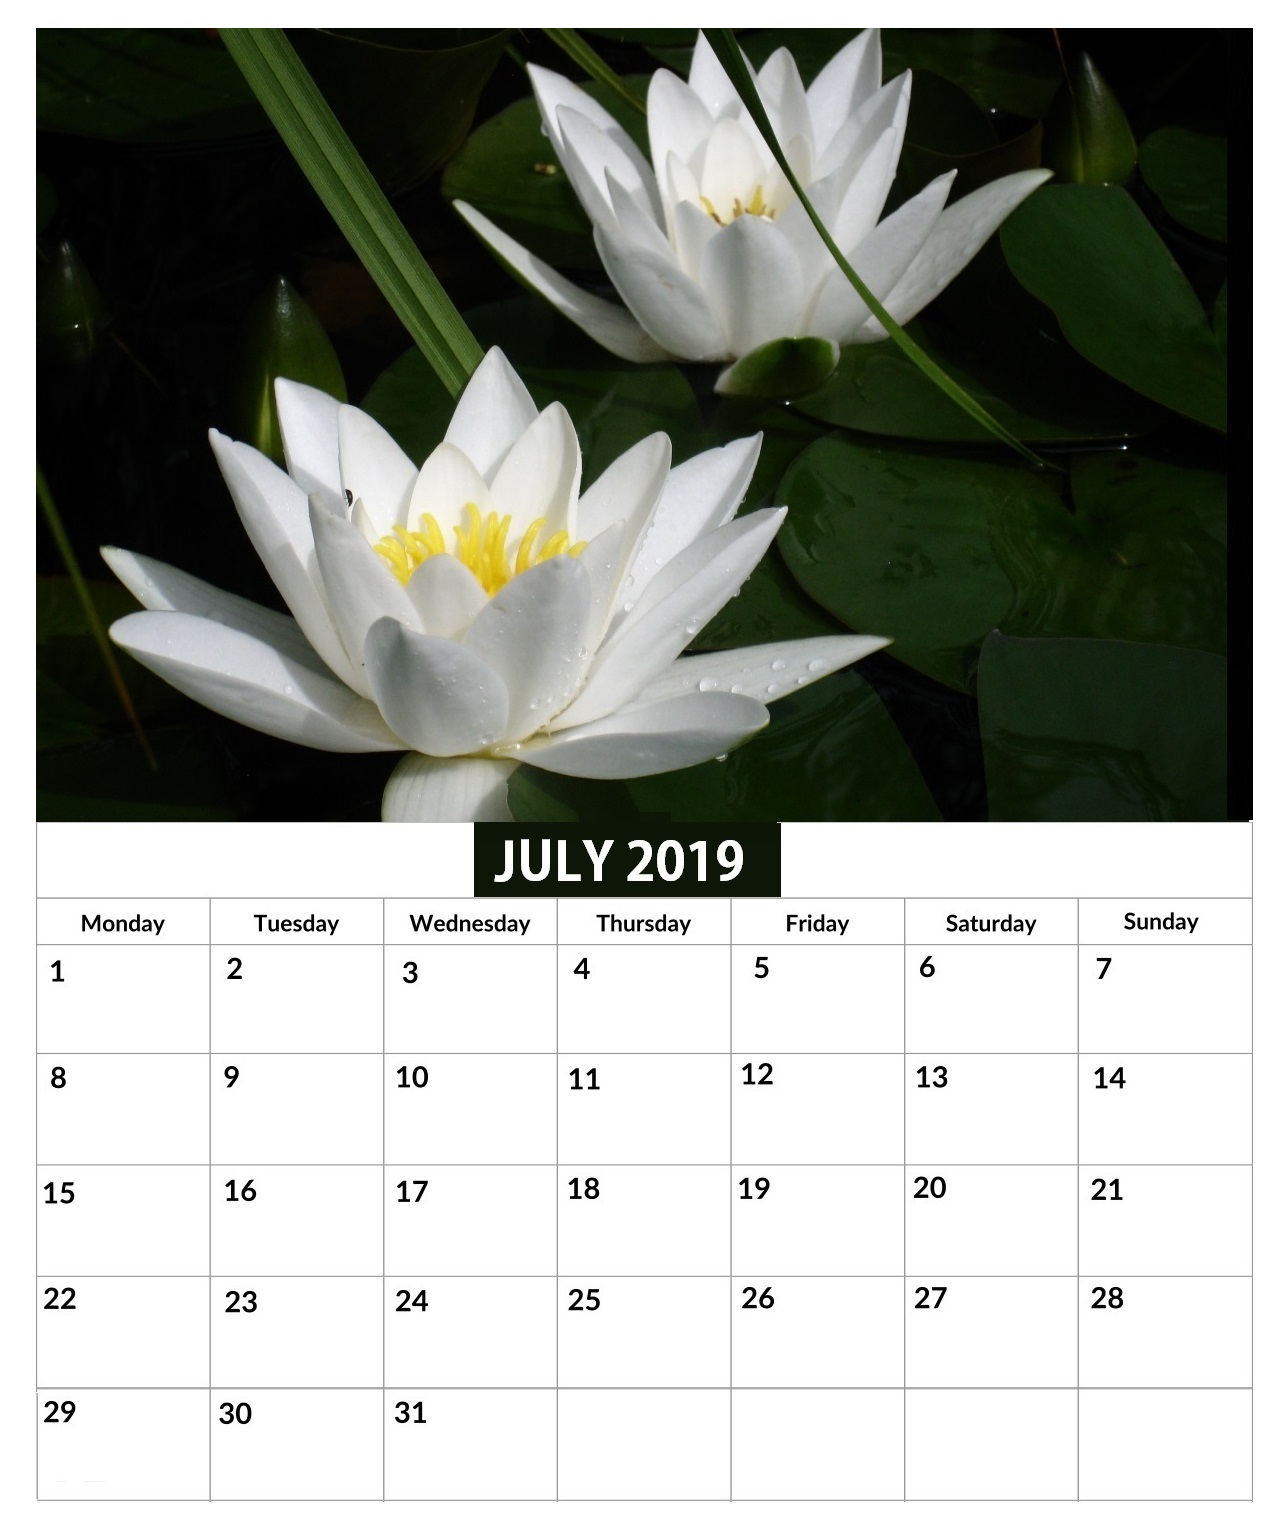 July 2019 Calendar For Office Wall